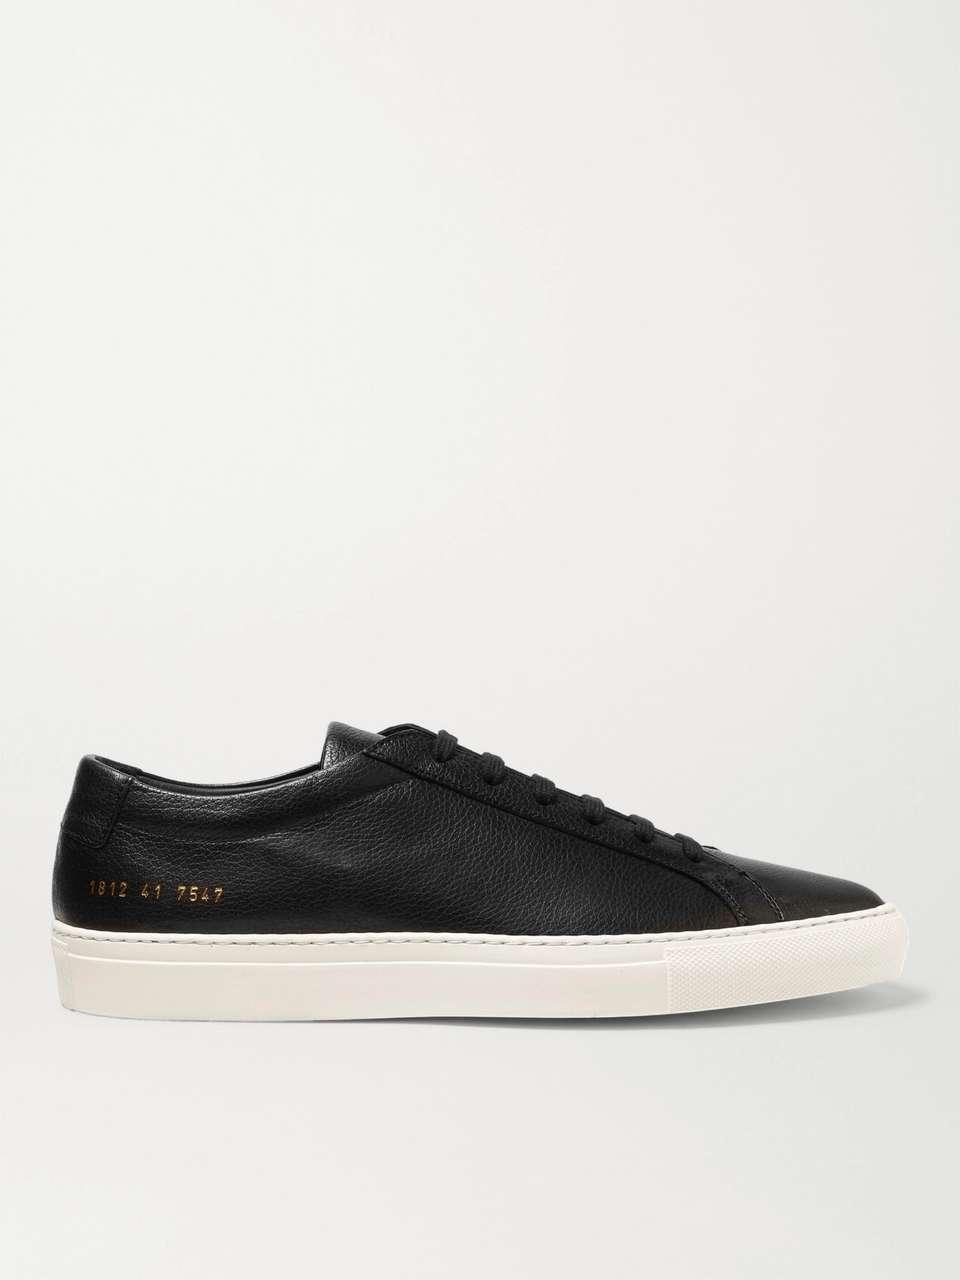 COMMON PROJECTS Original Achilles Full-Grain Leather Sneakers for Men ...